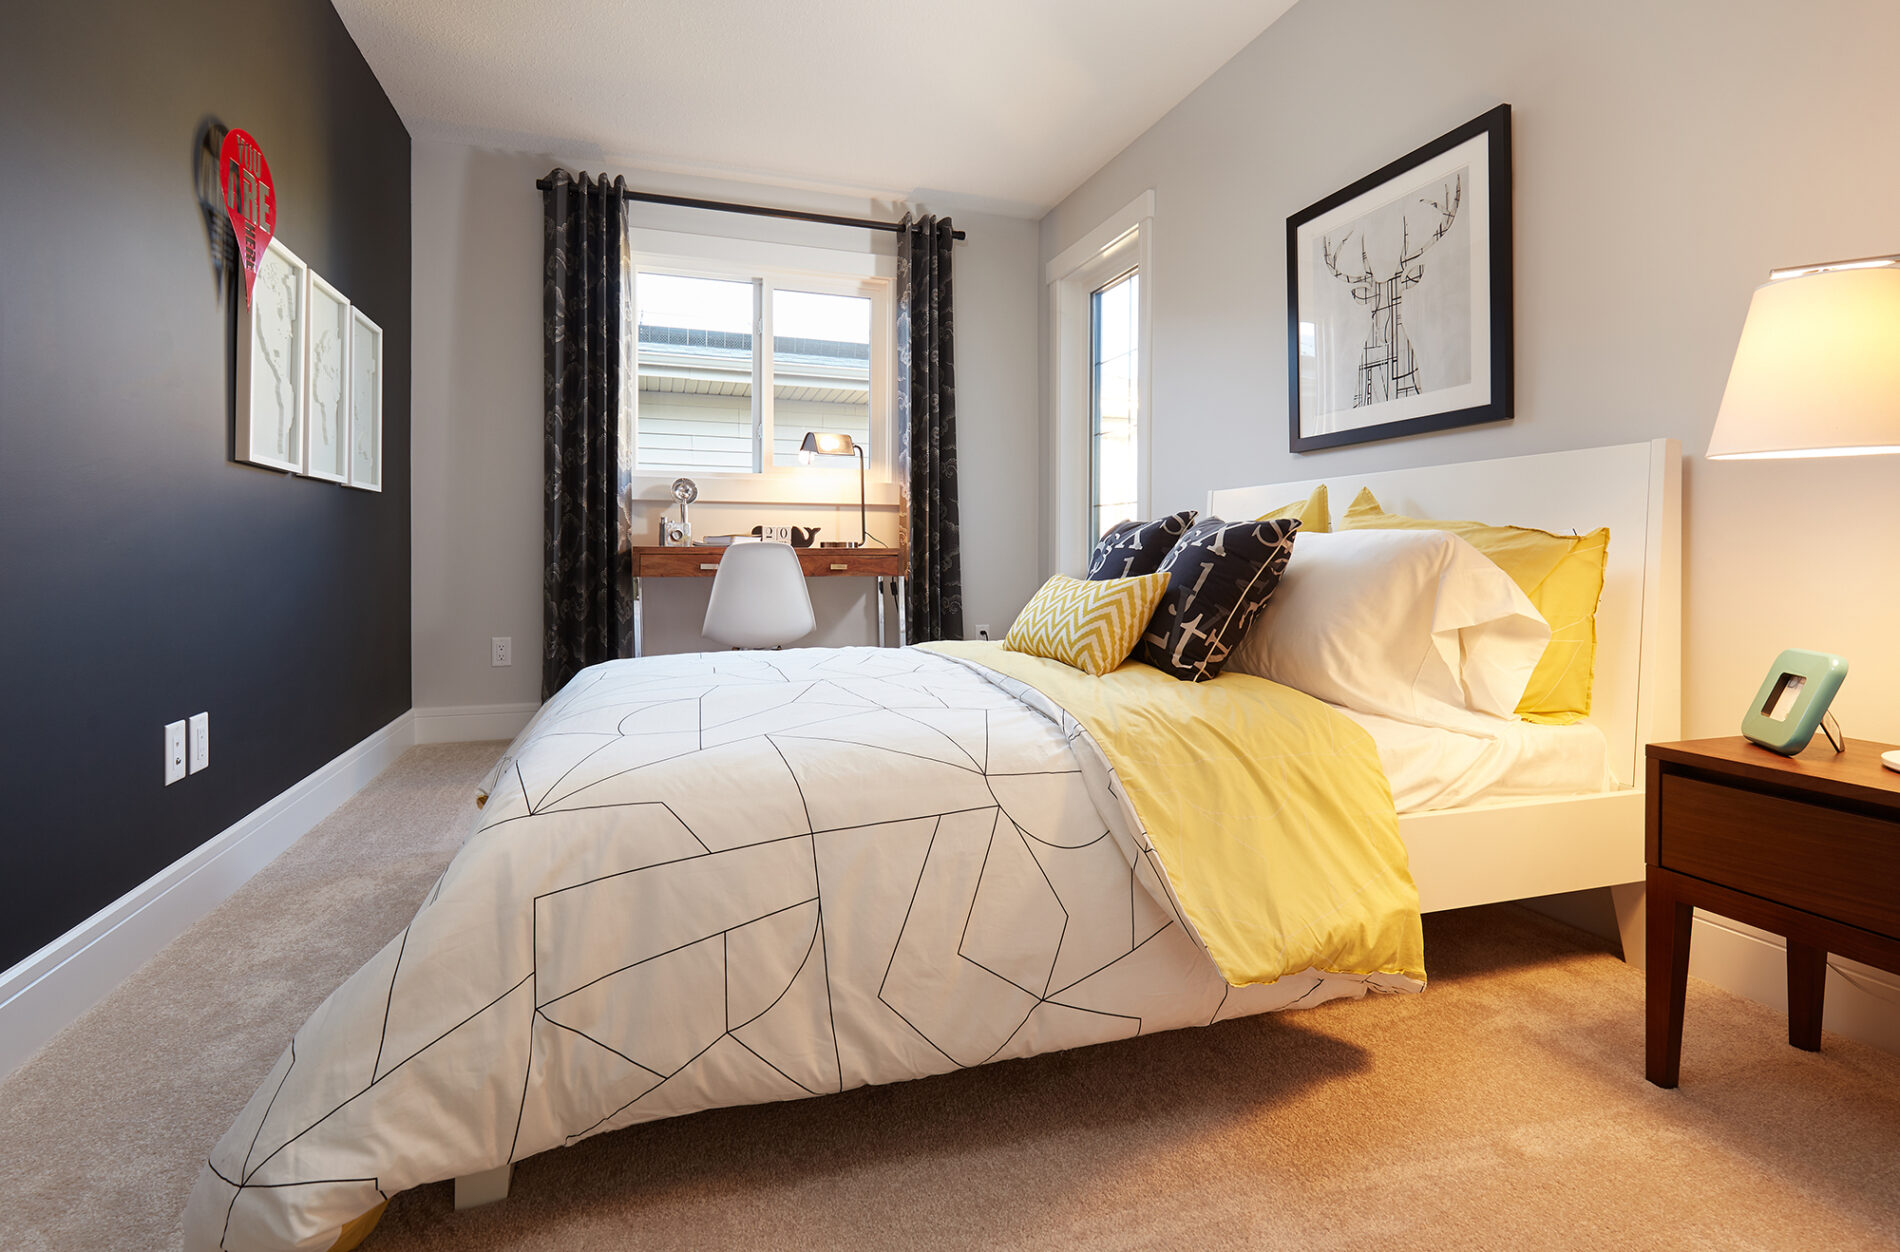 Simplistic secondary bedroom with bold black feature wall, white and black patterned bedding, black curtains, with a desk below the window and yellow accents in bedding and pillows